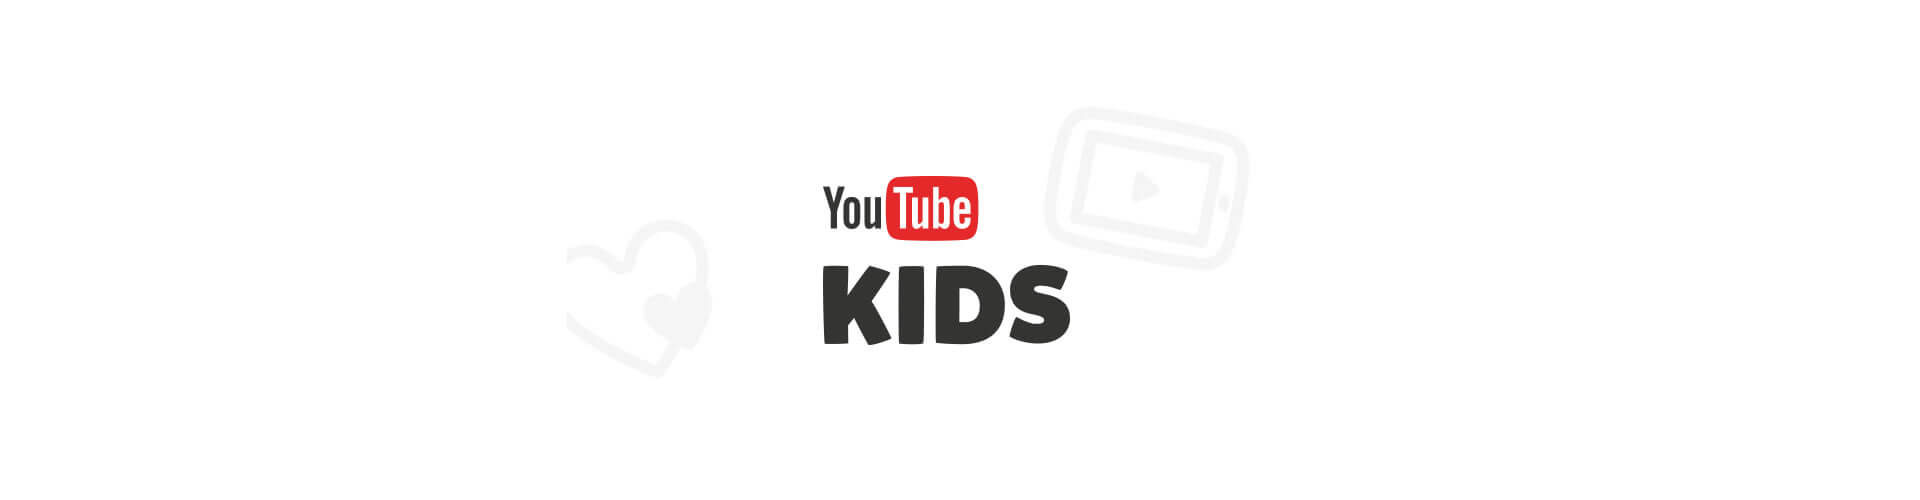 What is YouTube for Kids?